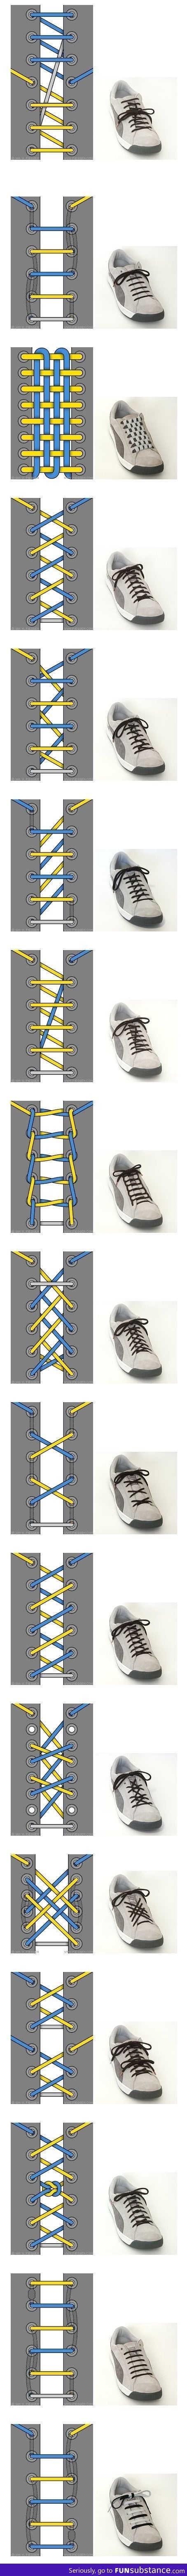 Different ways to tie your shoes